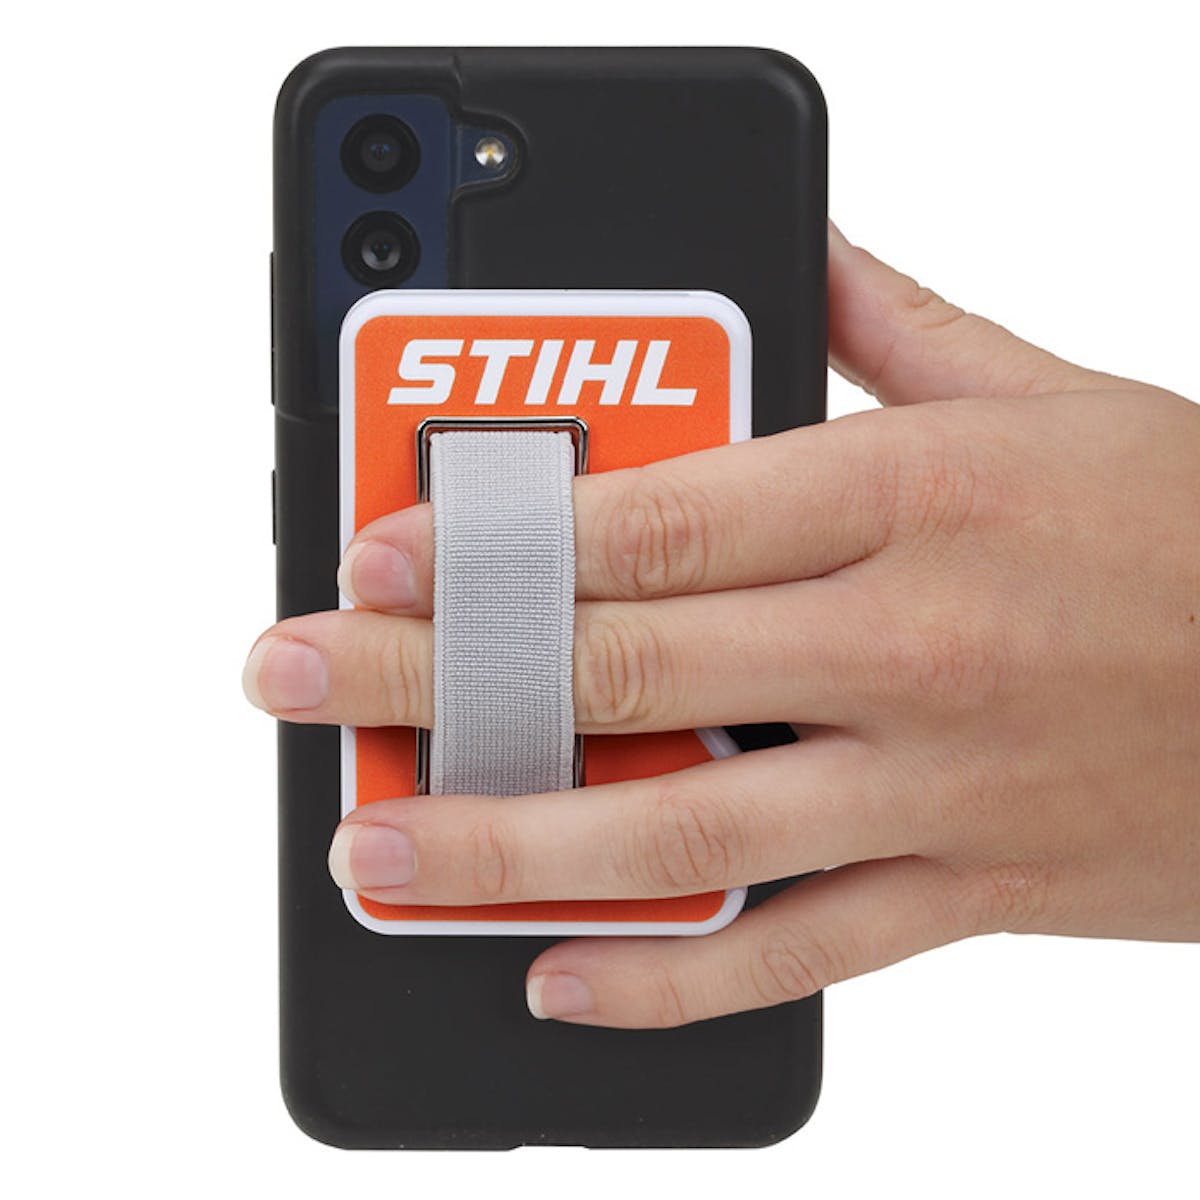 All-In-One Phone Accessory